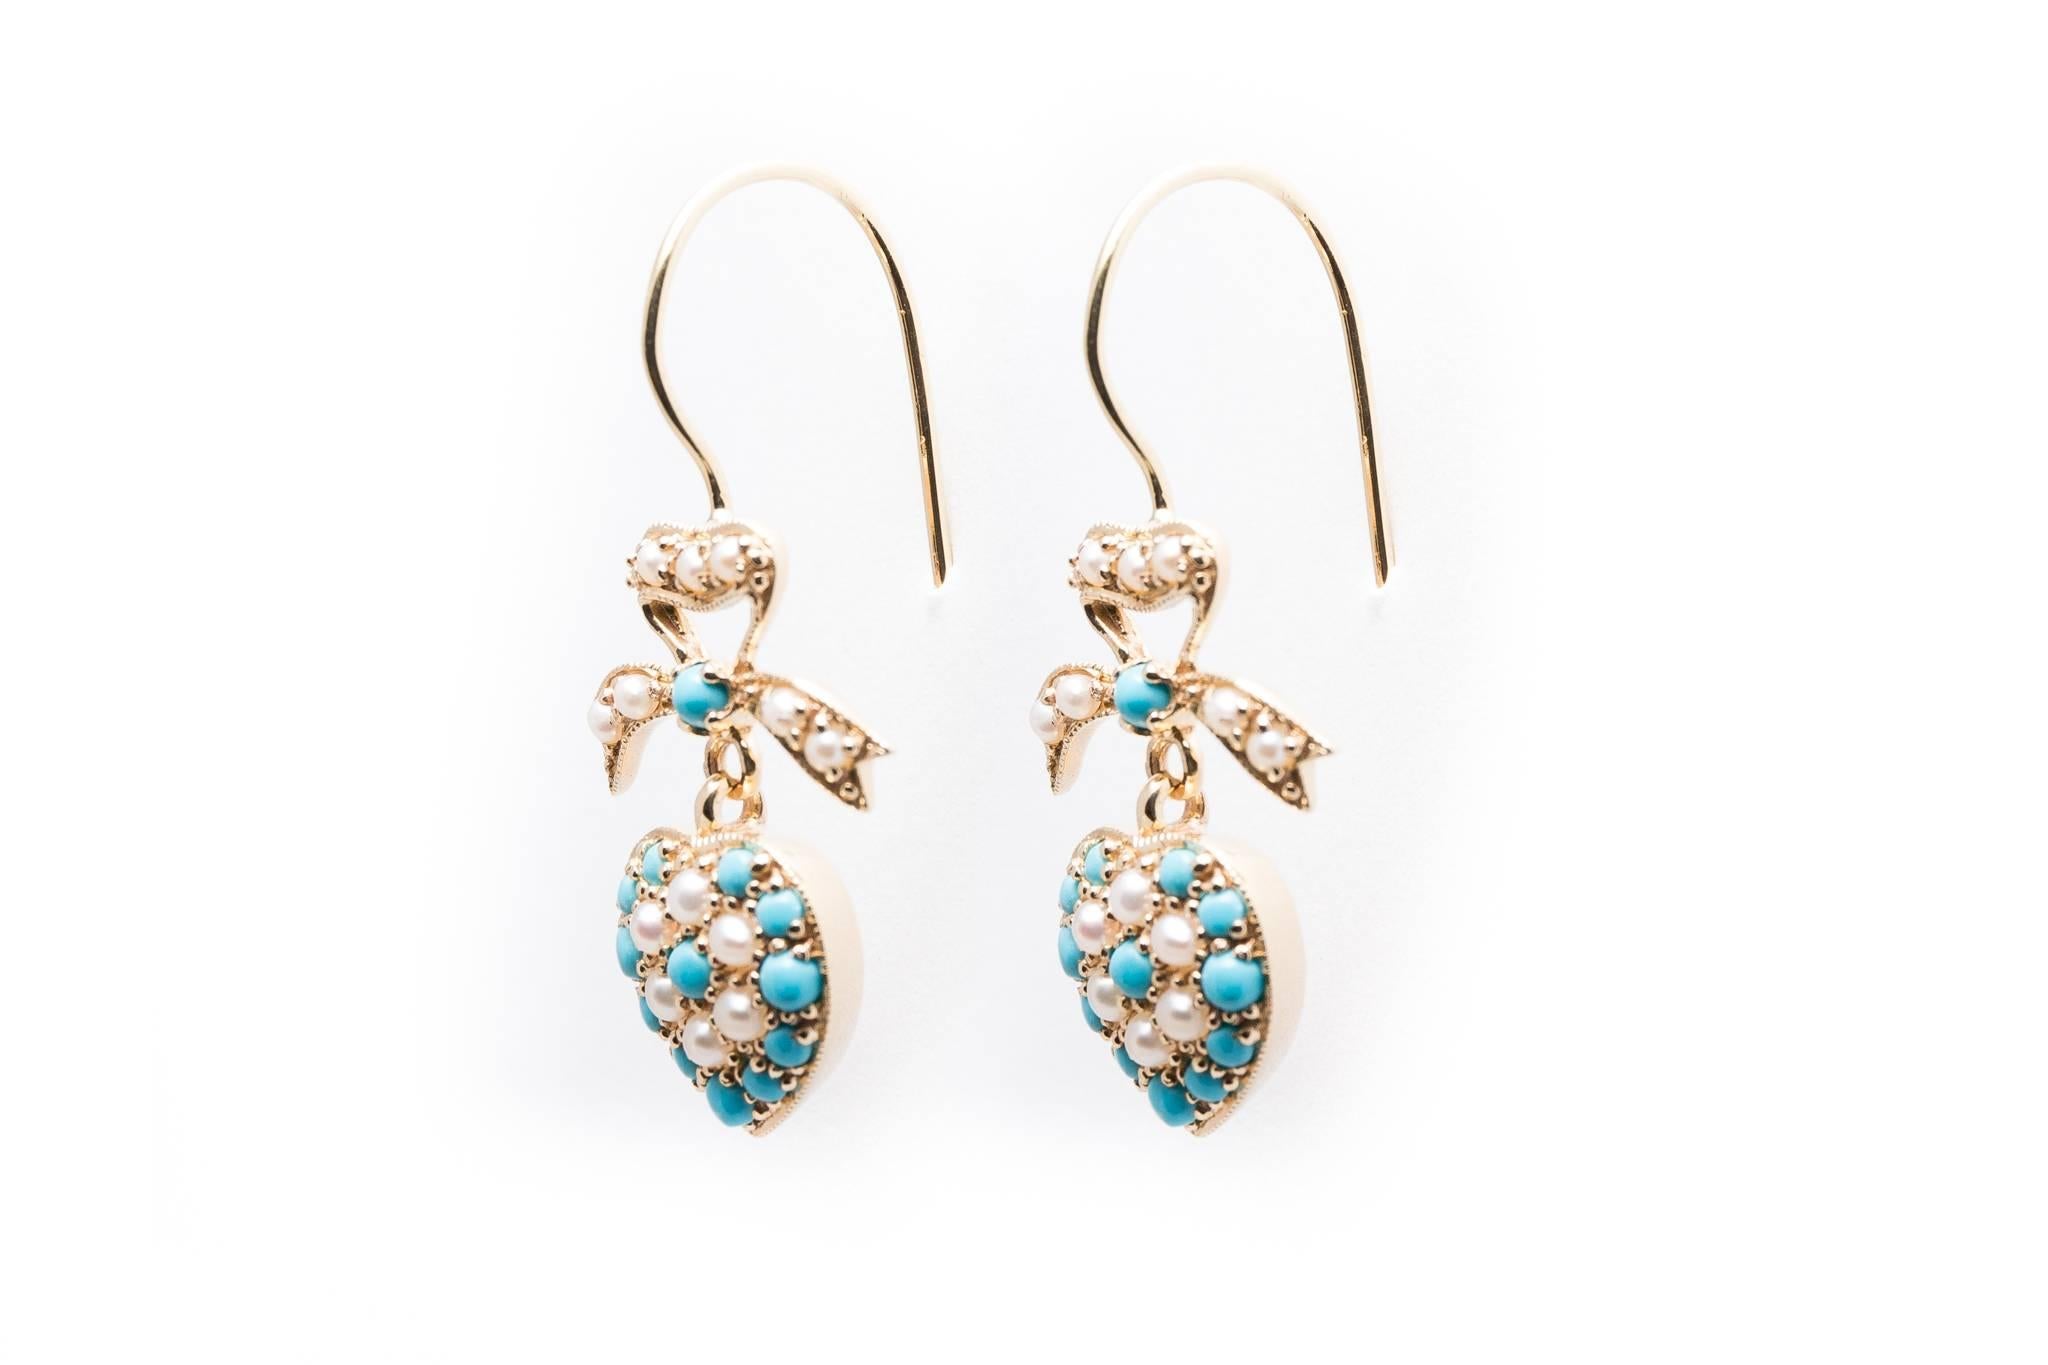 Dangling Turquoise and Pearl Heart Earrings in Yellow Gold In Excellent Condition For Sale In Boston, MA